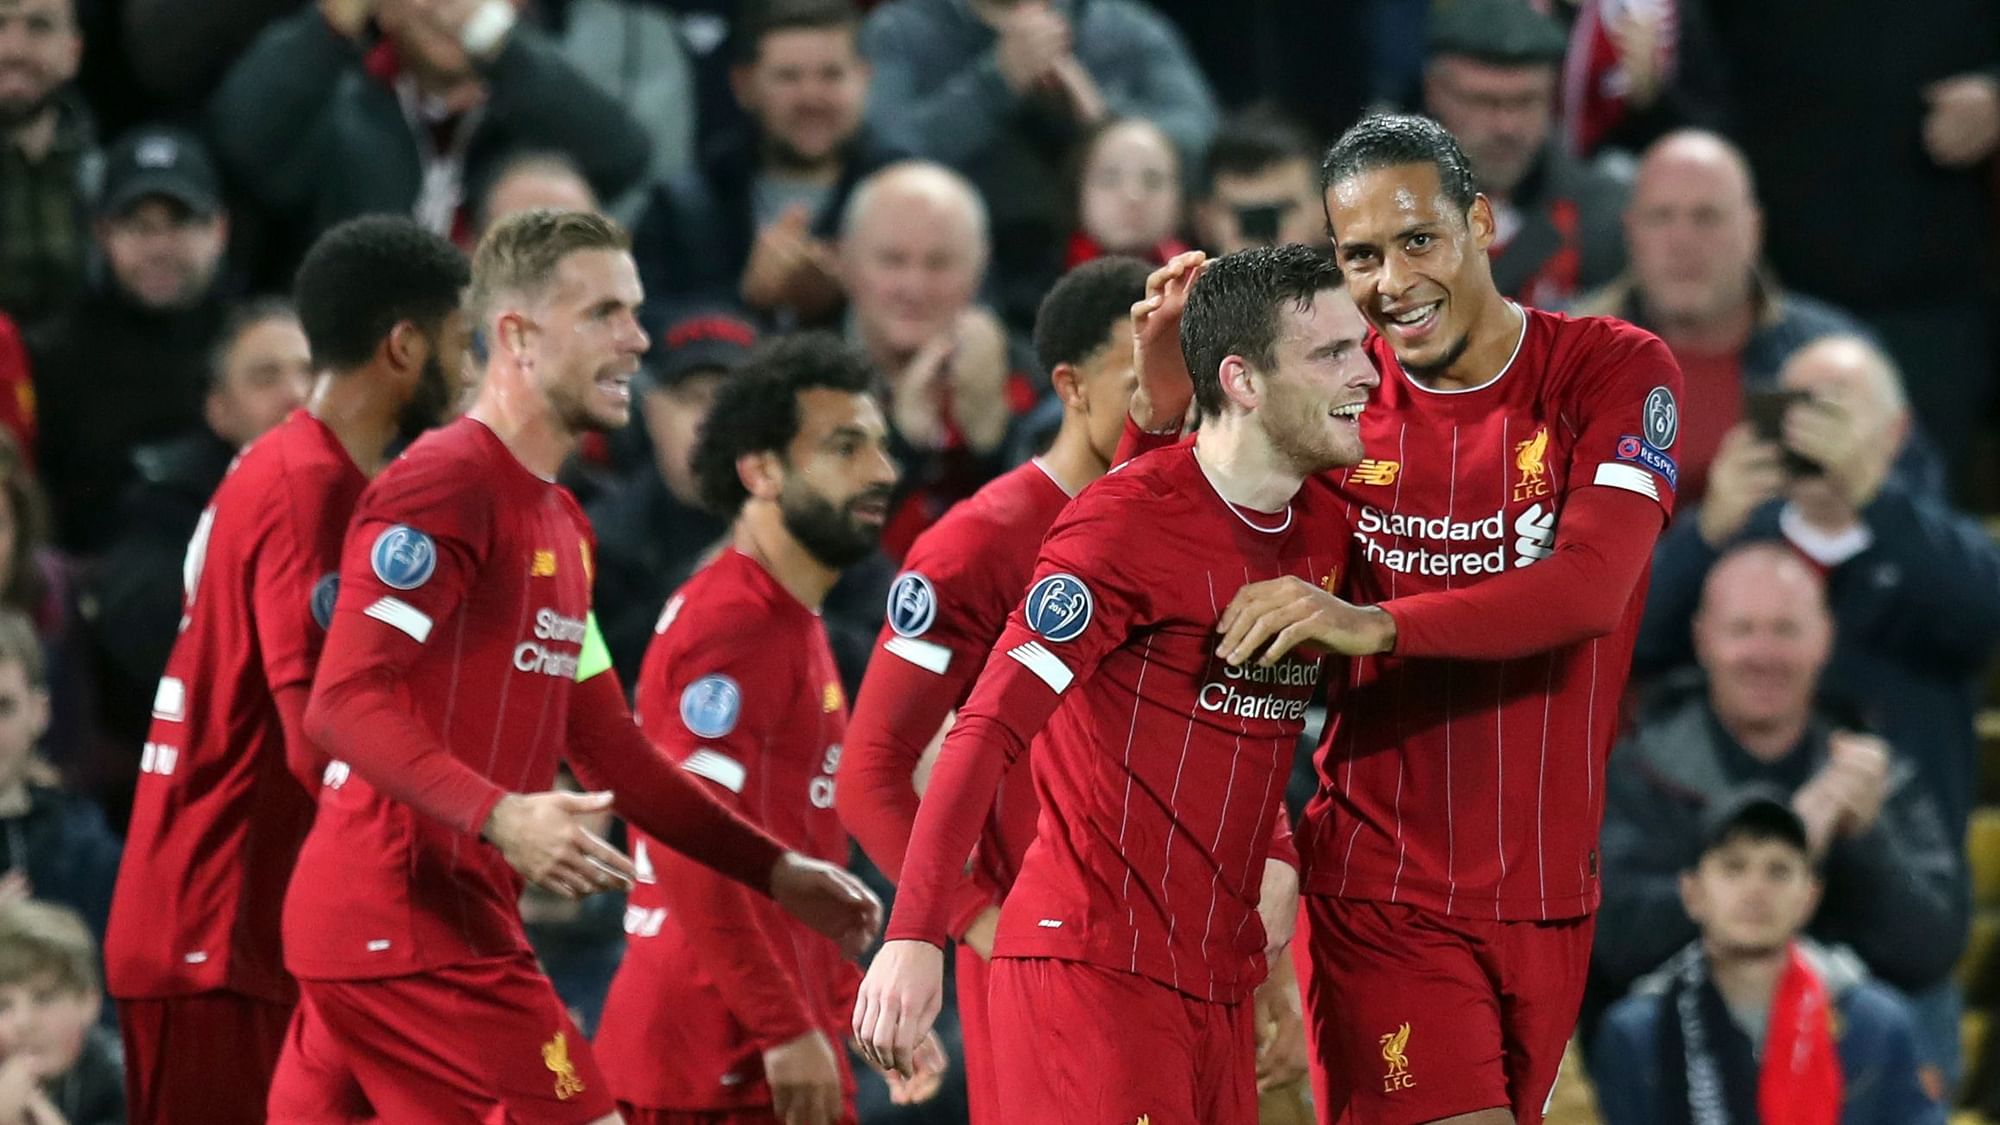 Liverpool celebrates after an Andrew Robertson goal in the Champions League.